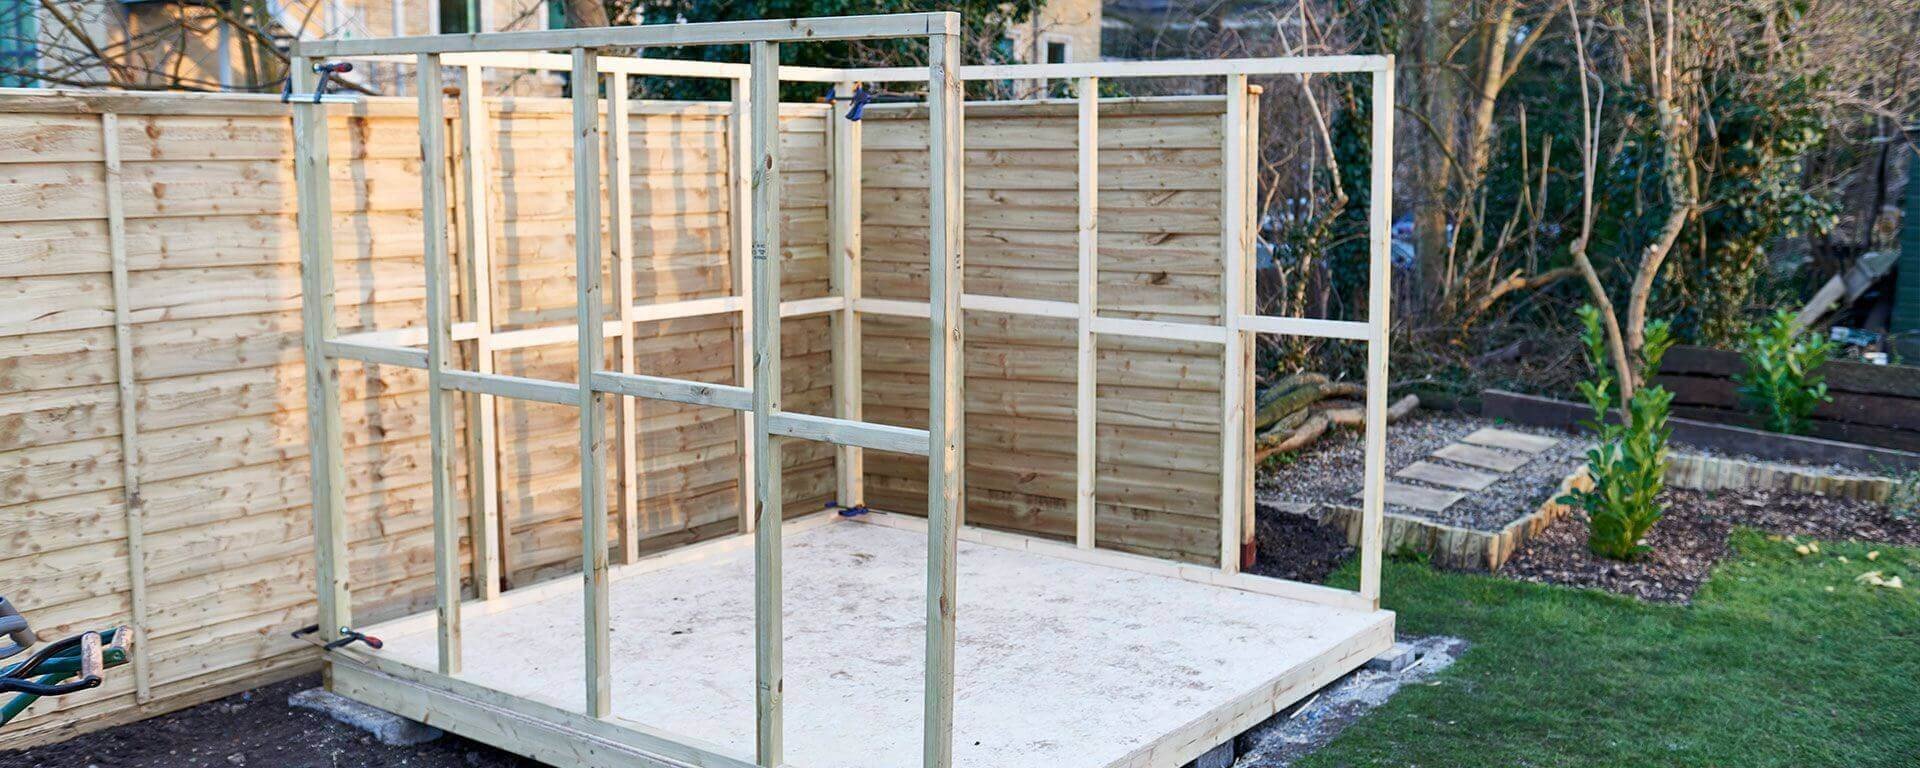 SHED SERIES PART 3: BUILDING THE WALL FRAMES